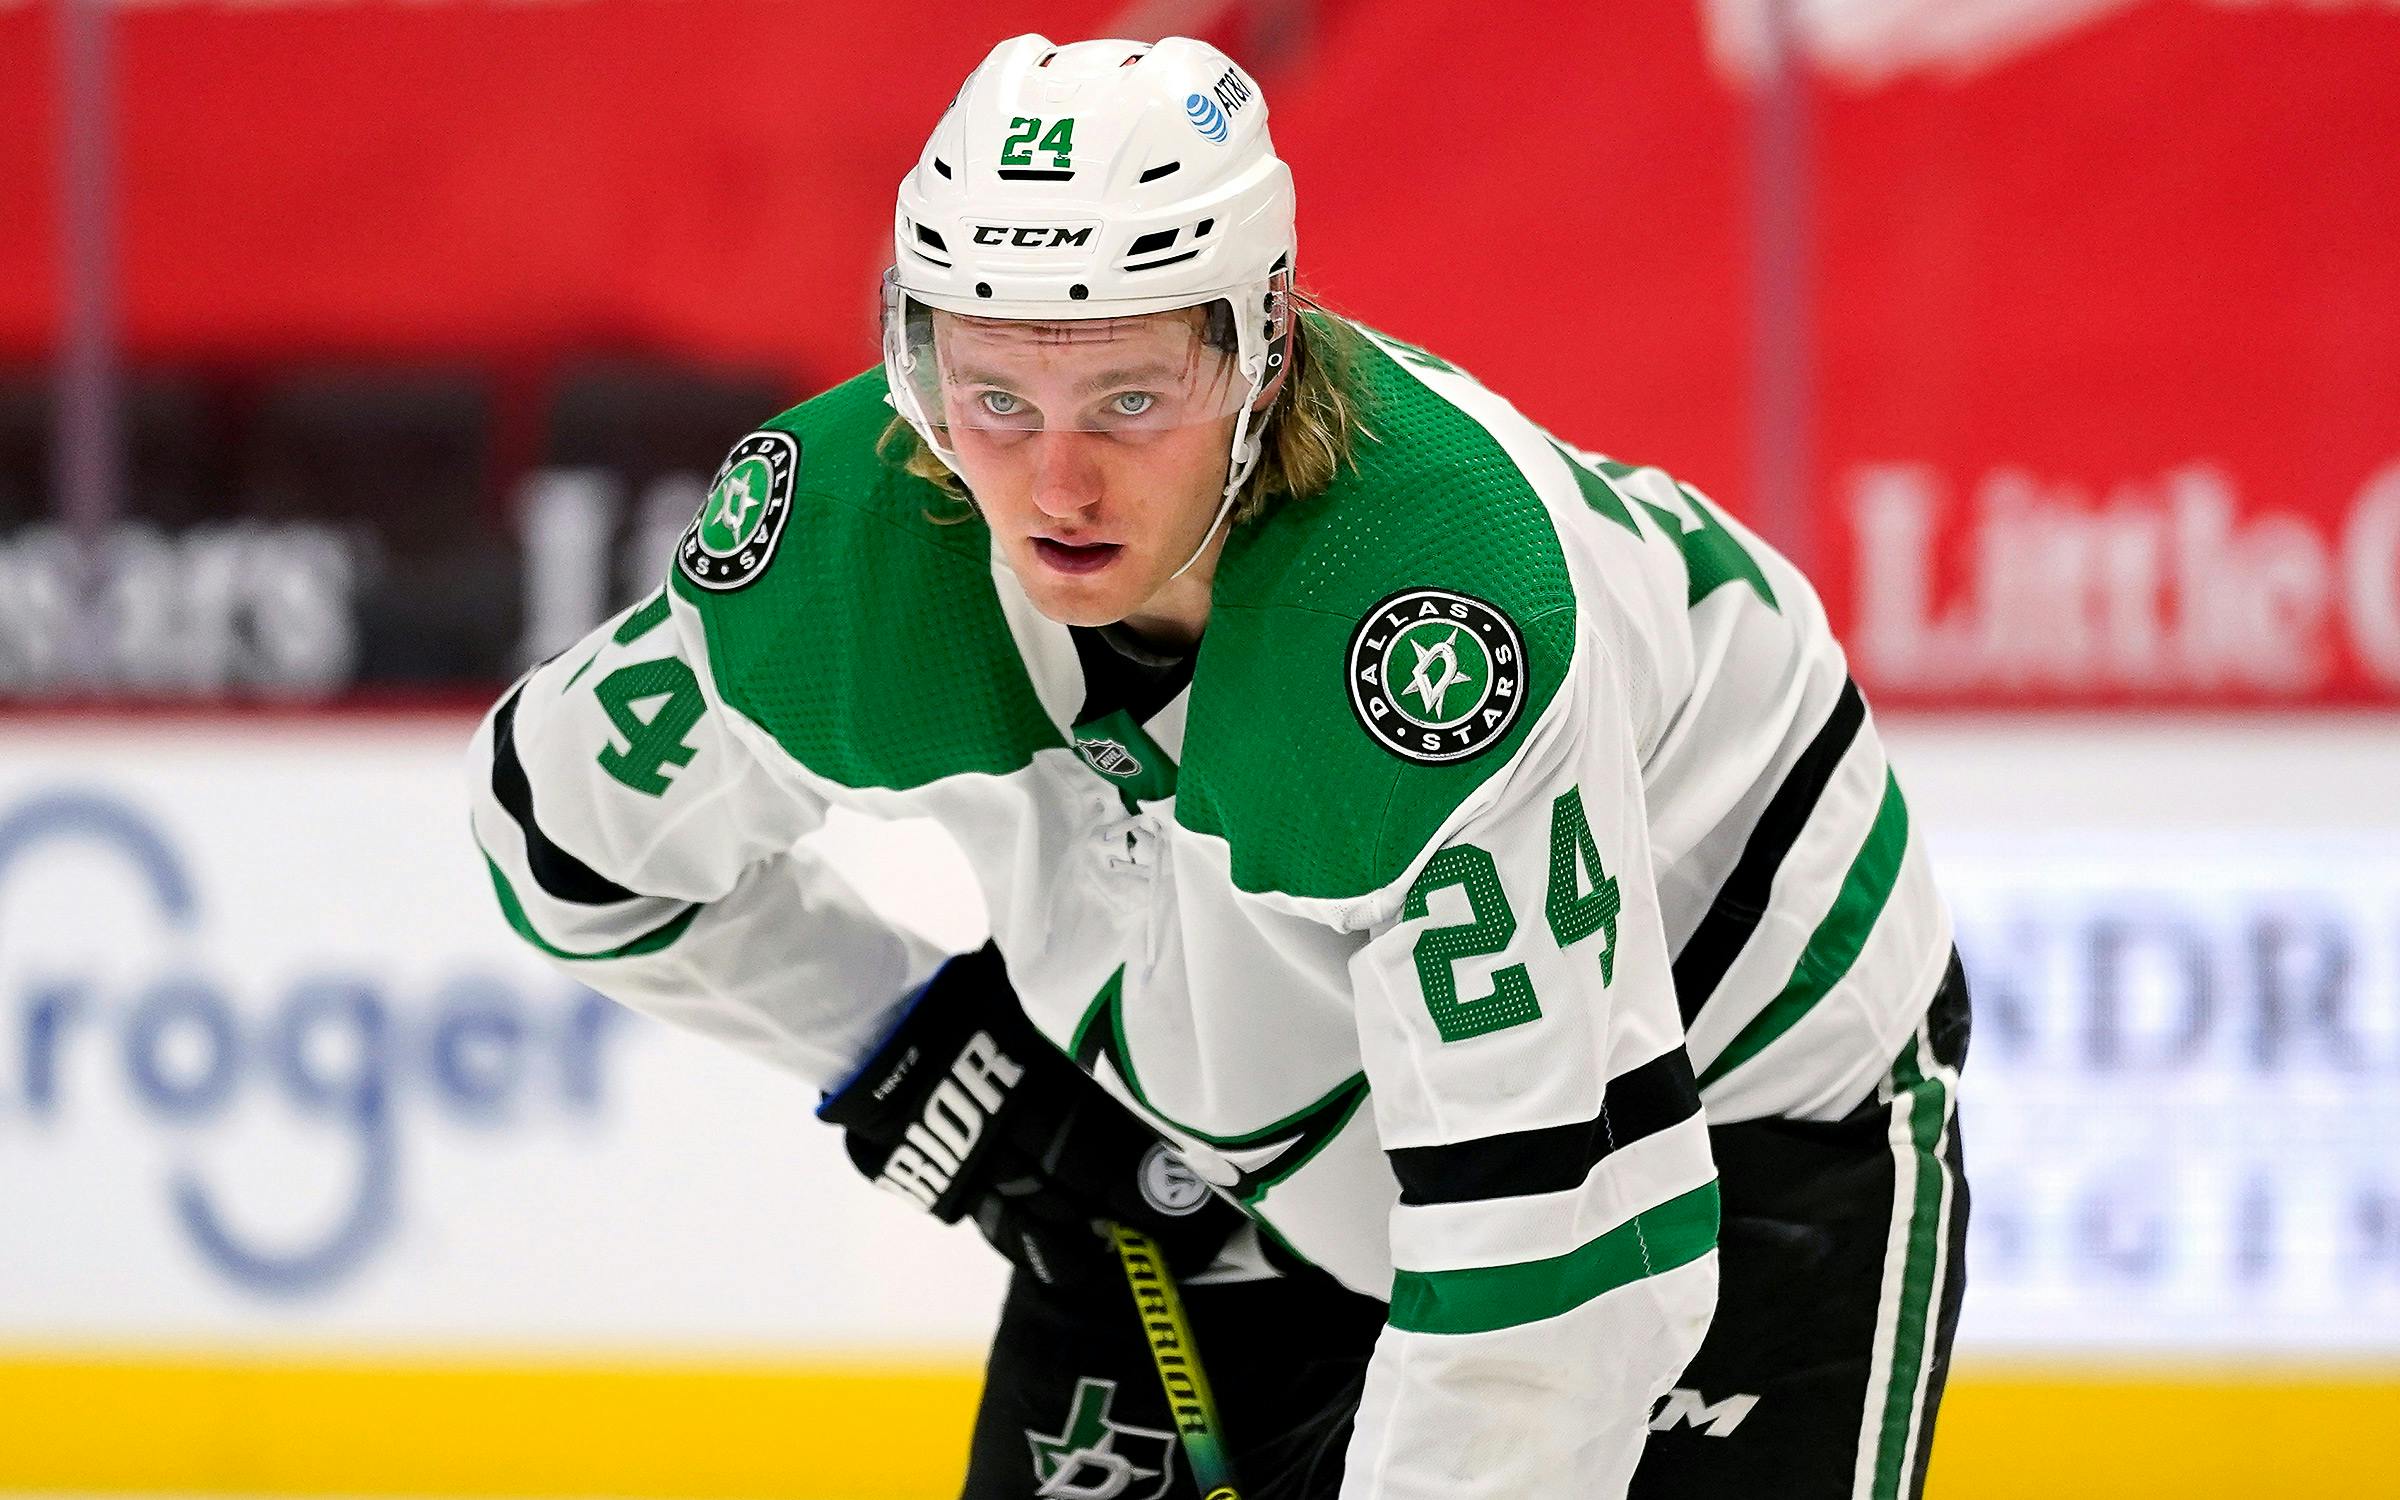 Stars lose Jamie Benn, pull Jake Oettinger early in Game 3 to fall